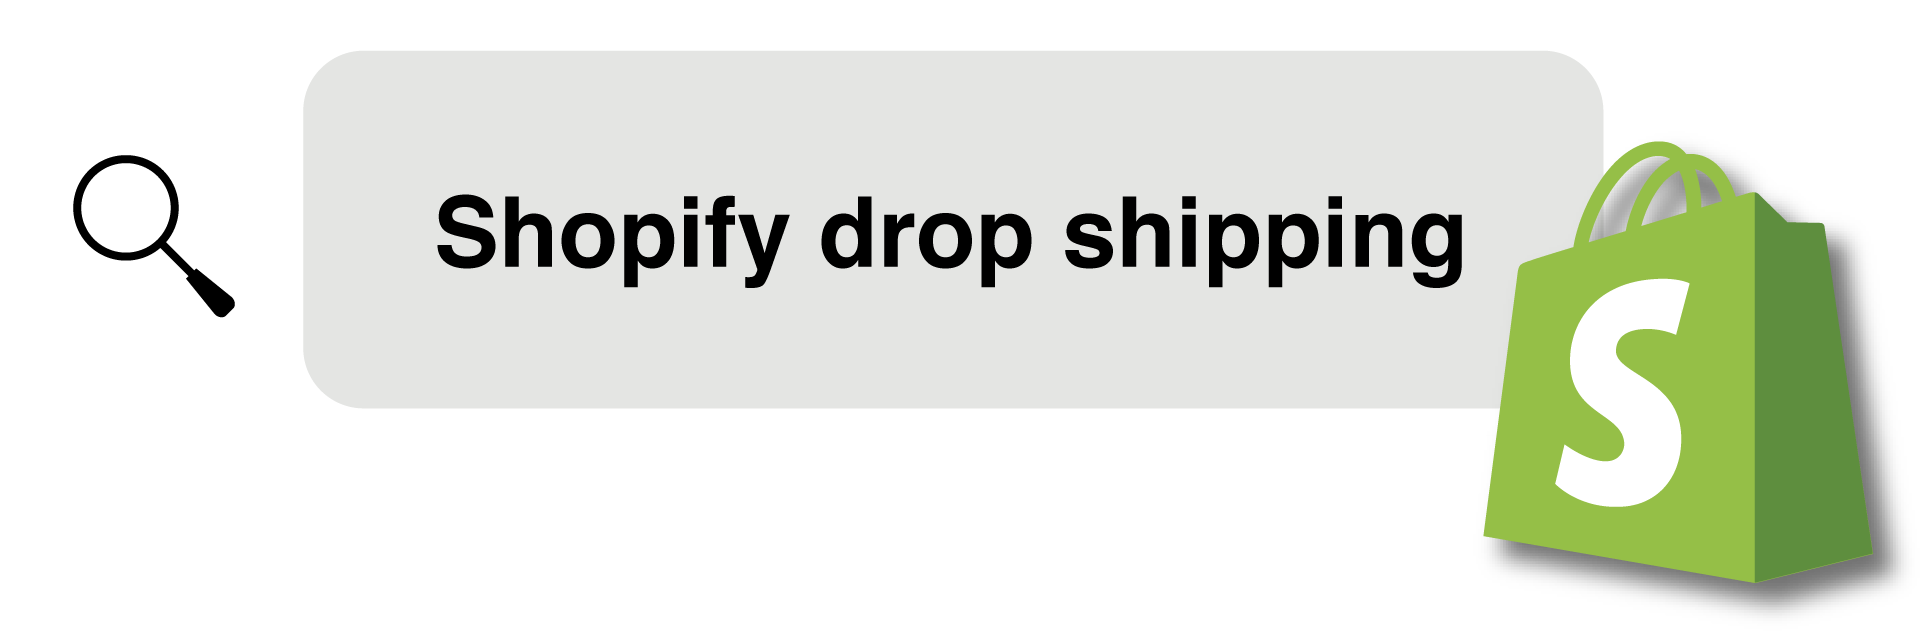 Dropshipping: Unique Facts and Strategies for Successful Shopify Dropshipping 9